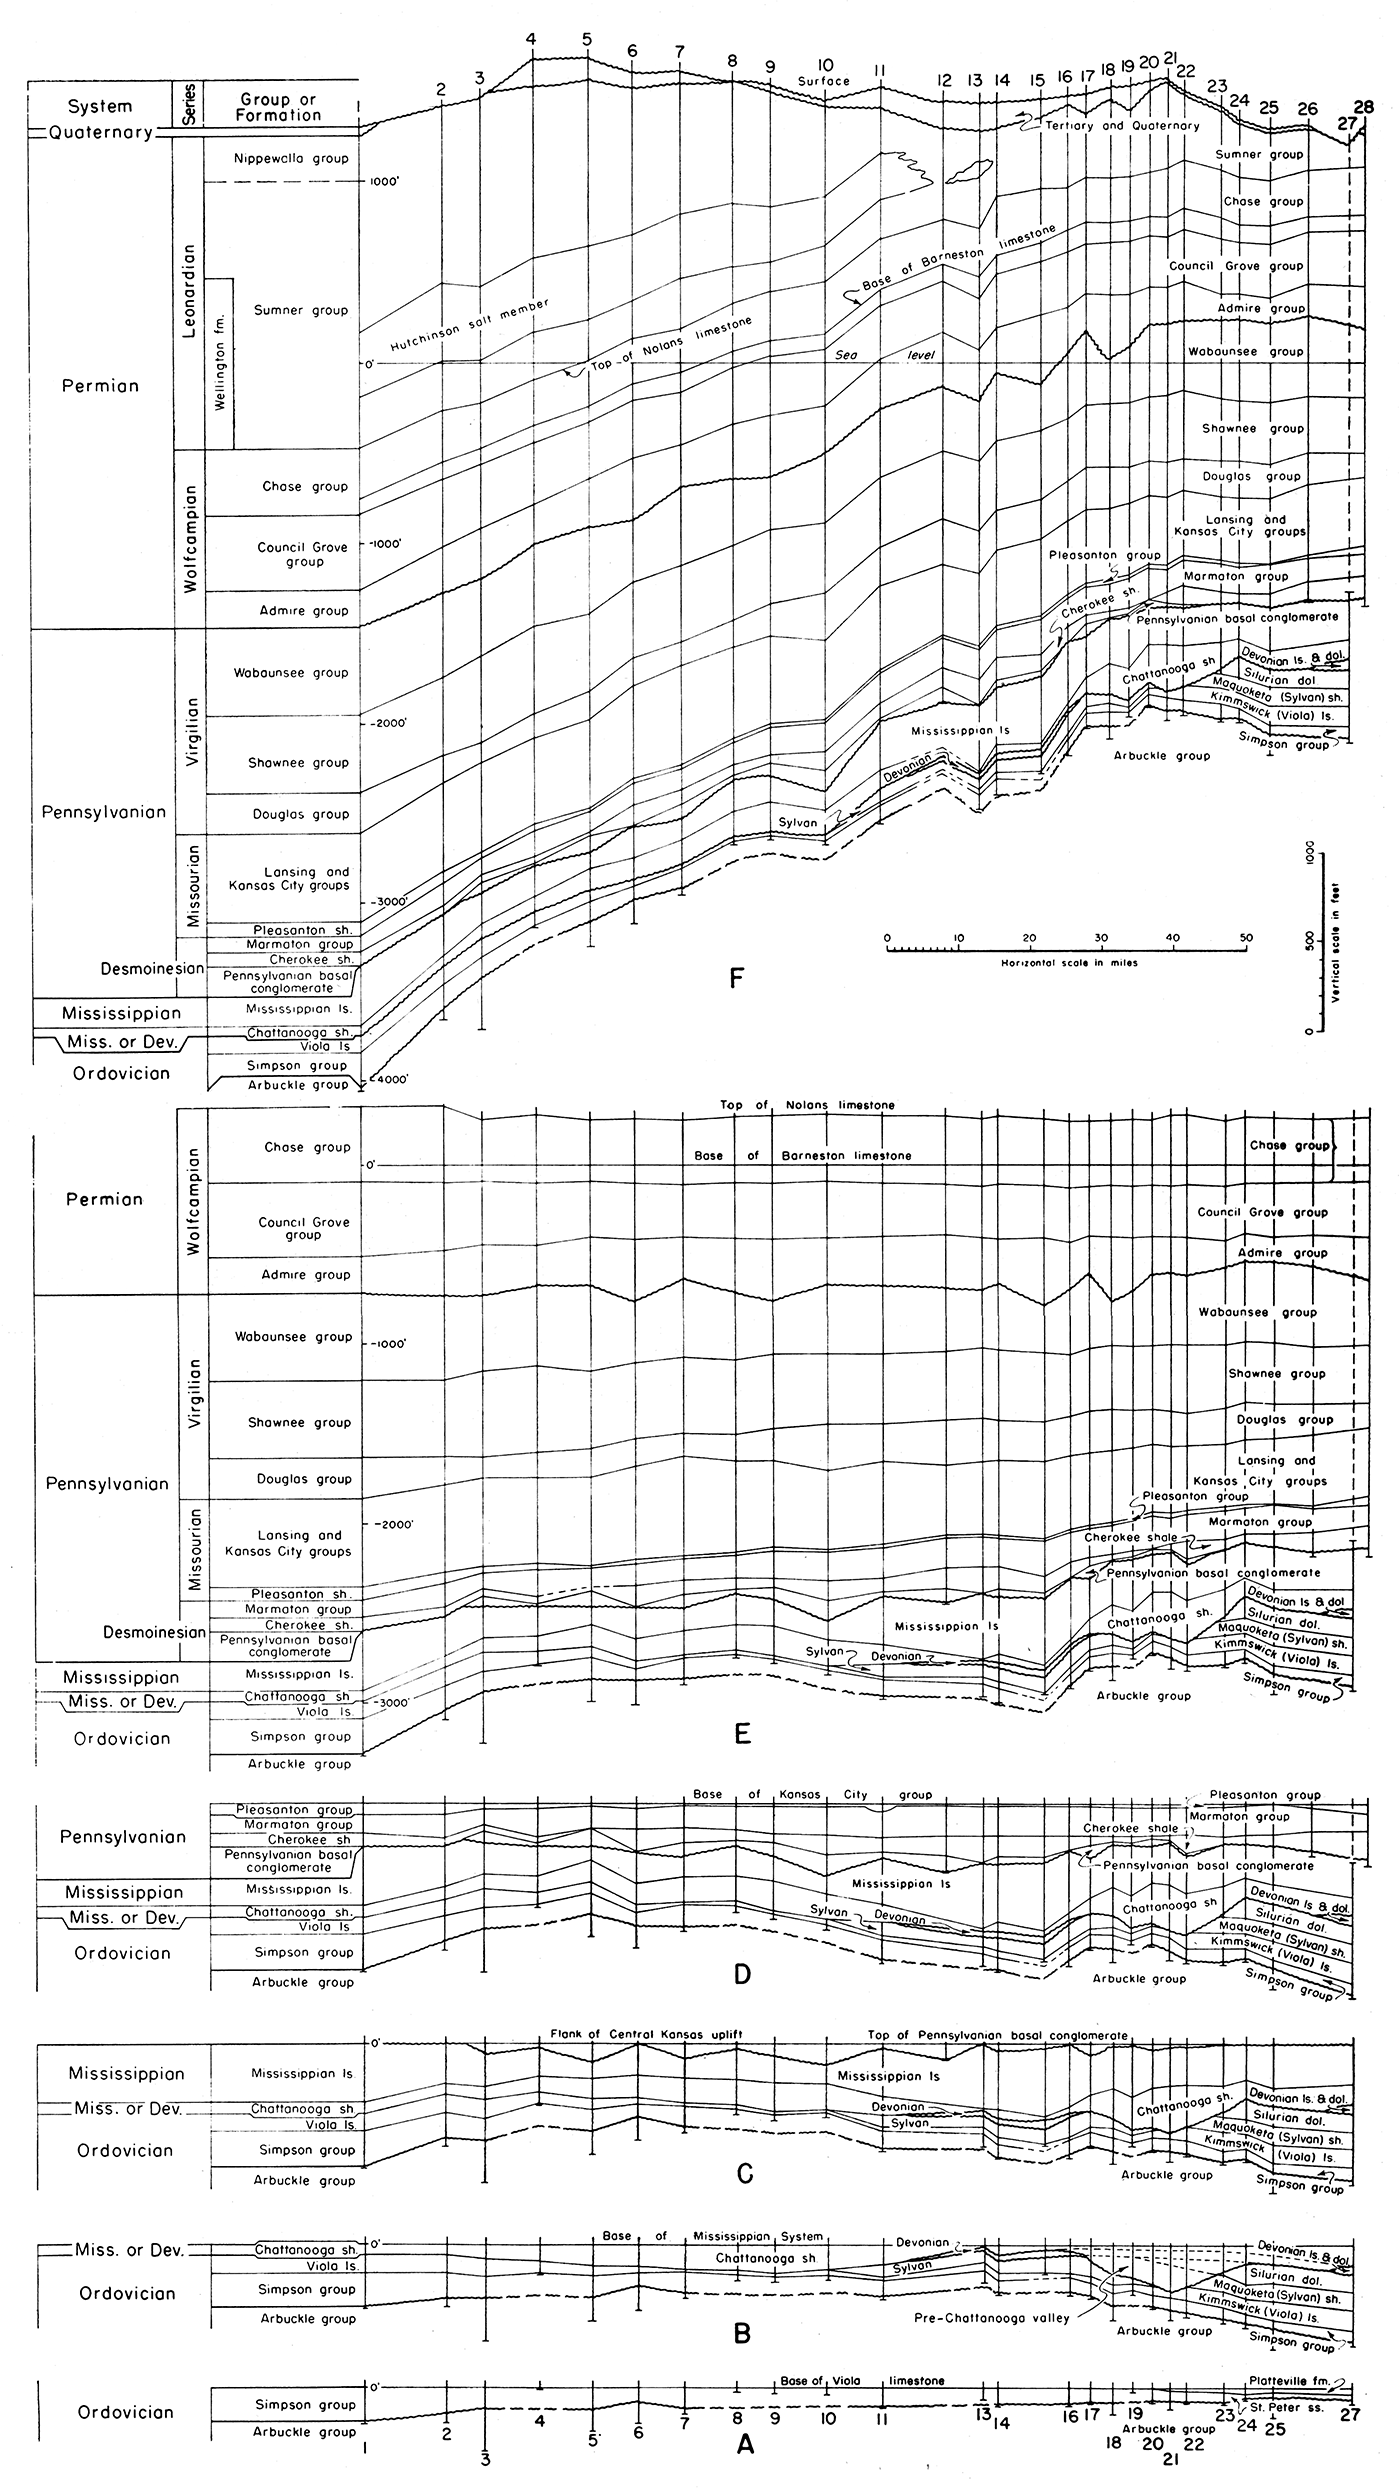 Skeletonized cross sections on the line of the large cross section showing the development of structure by correlation of logs on successive beveled or depositional surfaces